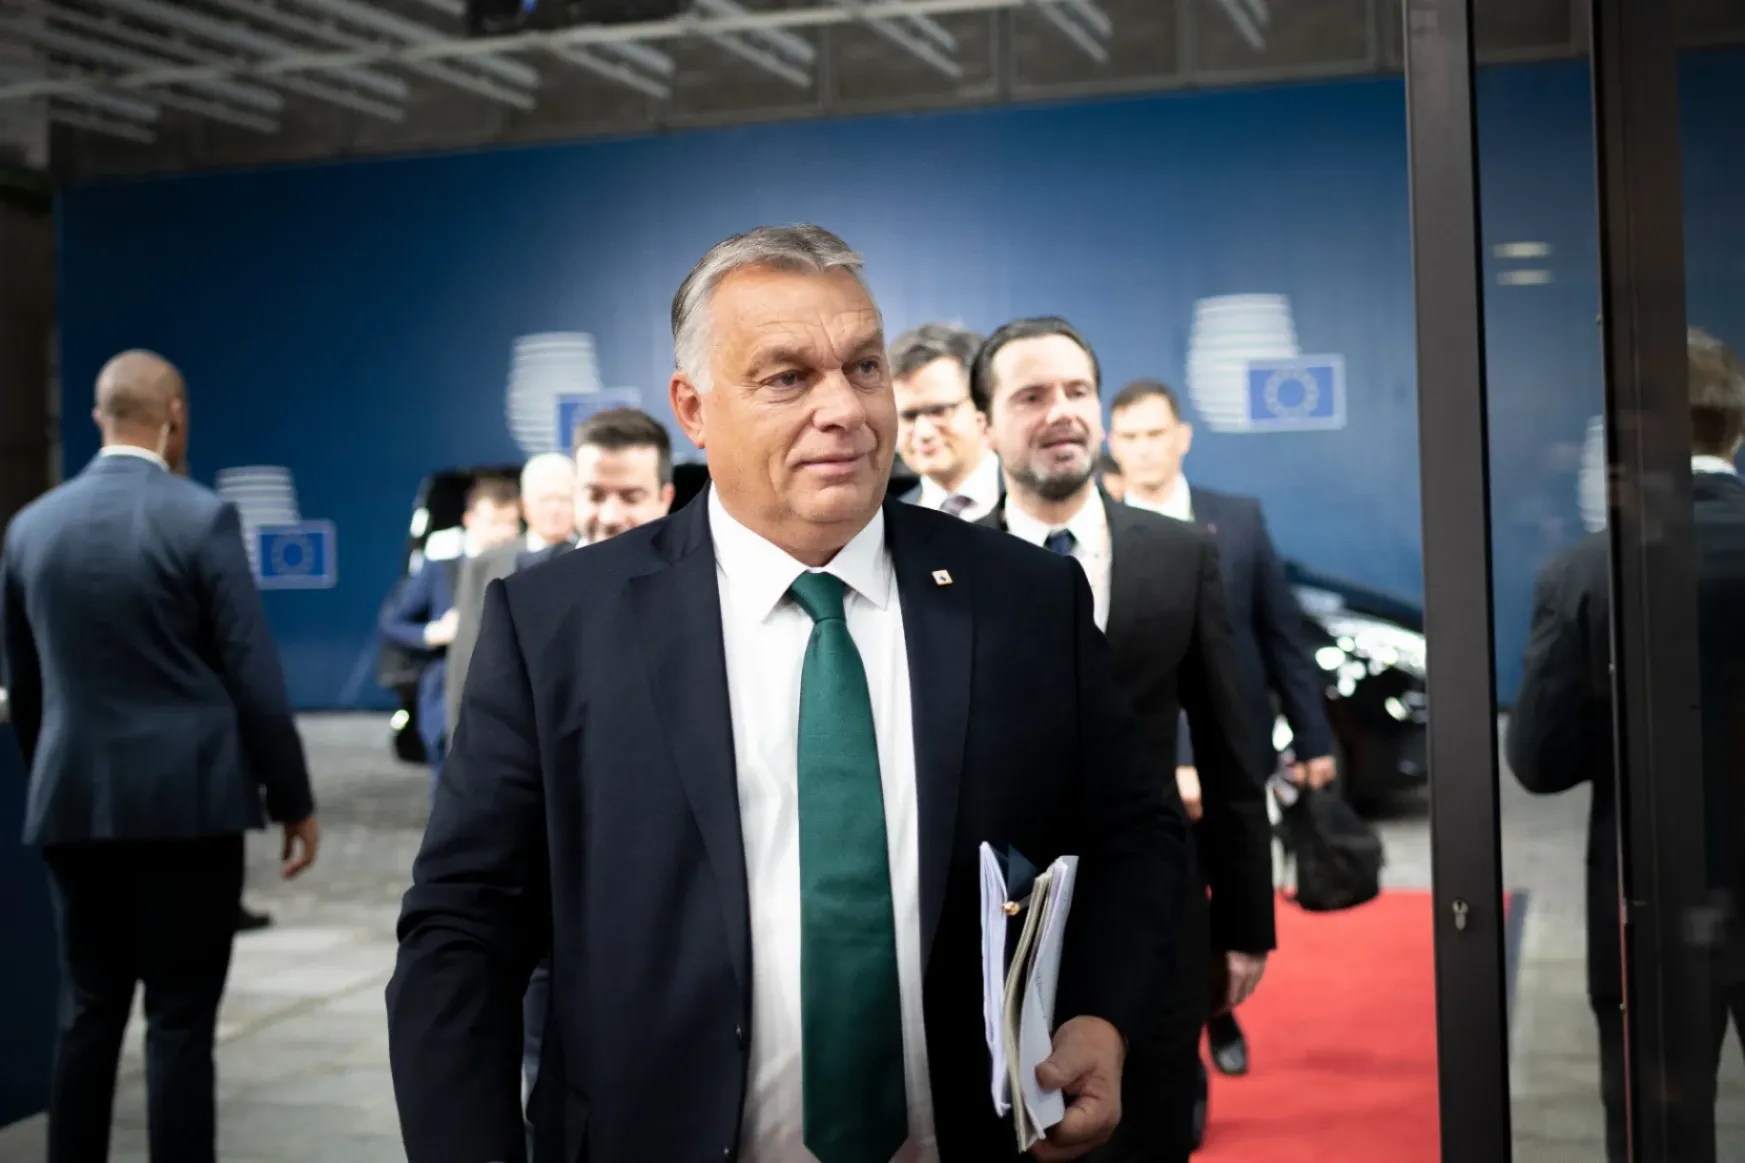 Orbán: Hungarian society is much more pluralistic, free and peaceful than German society